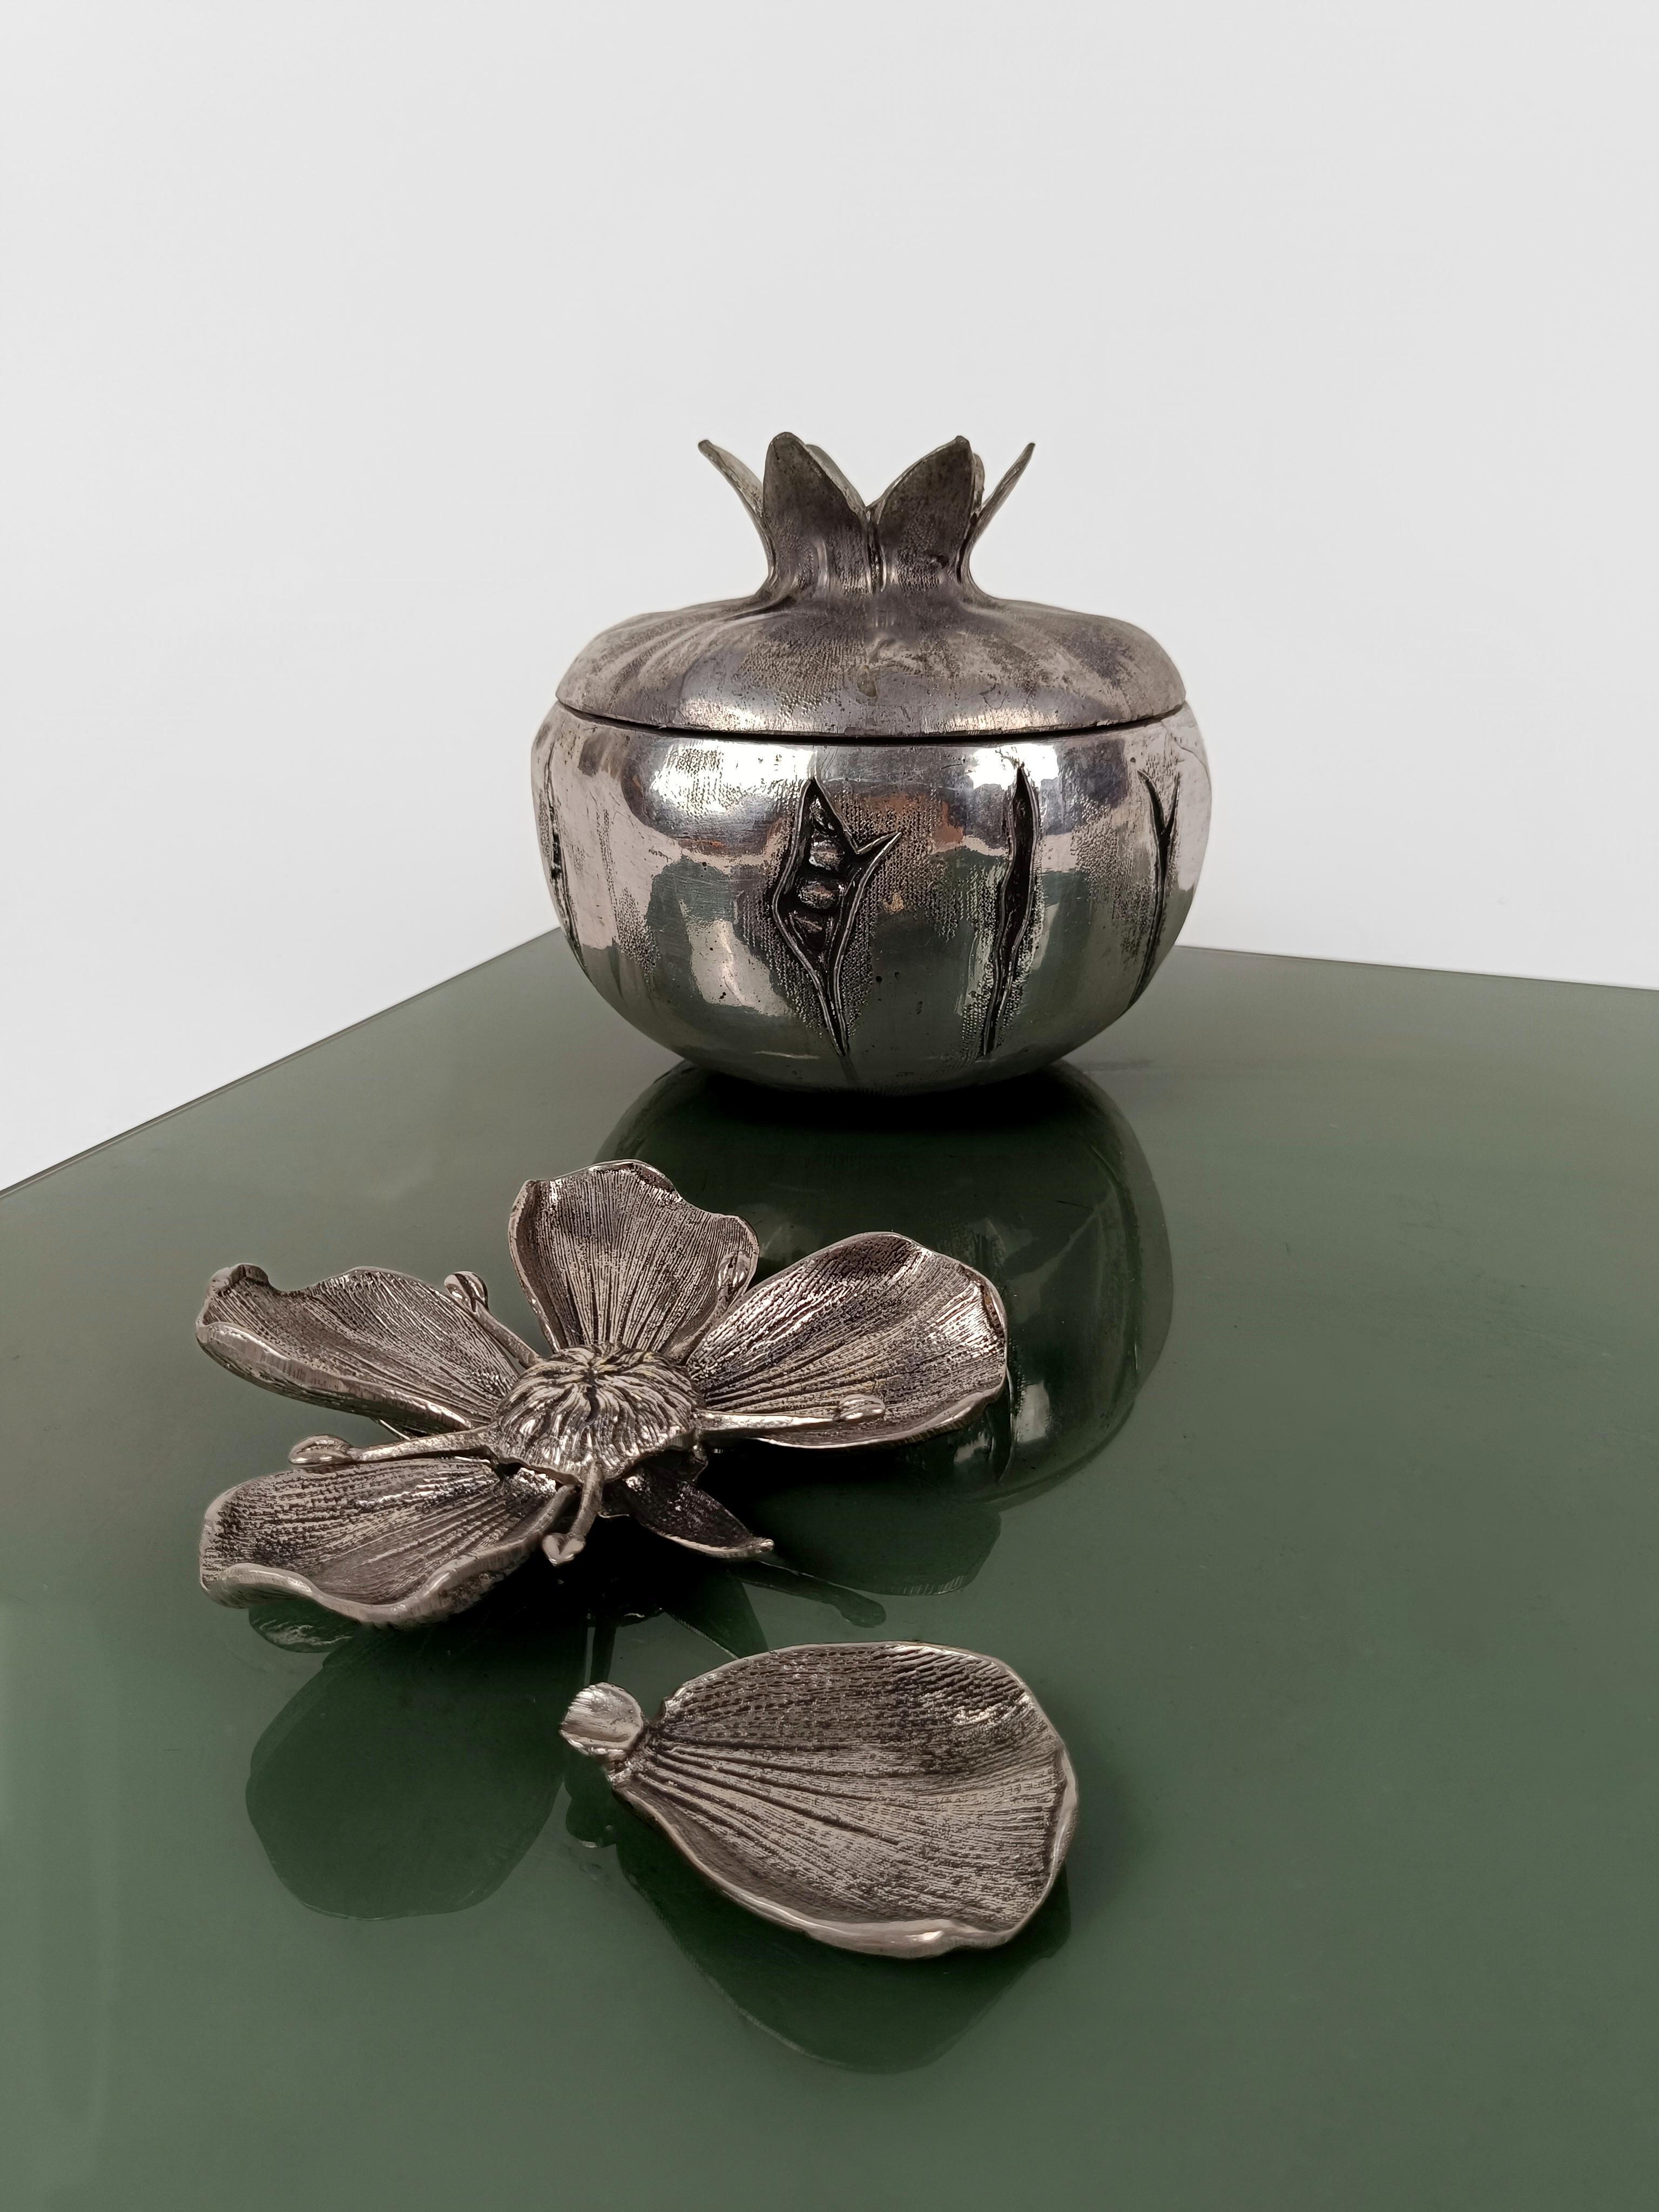 A fabulous ashtray dating back to around the 70s but also a stunning decorative element for your home today
I imagine it as a paperweight on a desk or on a coffee table in smoked green glass (as in the photos) to reproduce an aquatic flower, such as